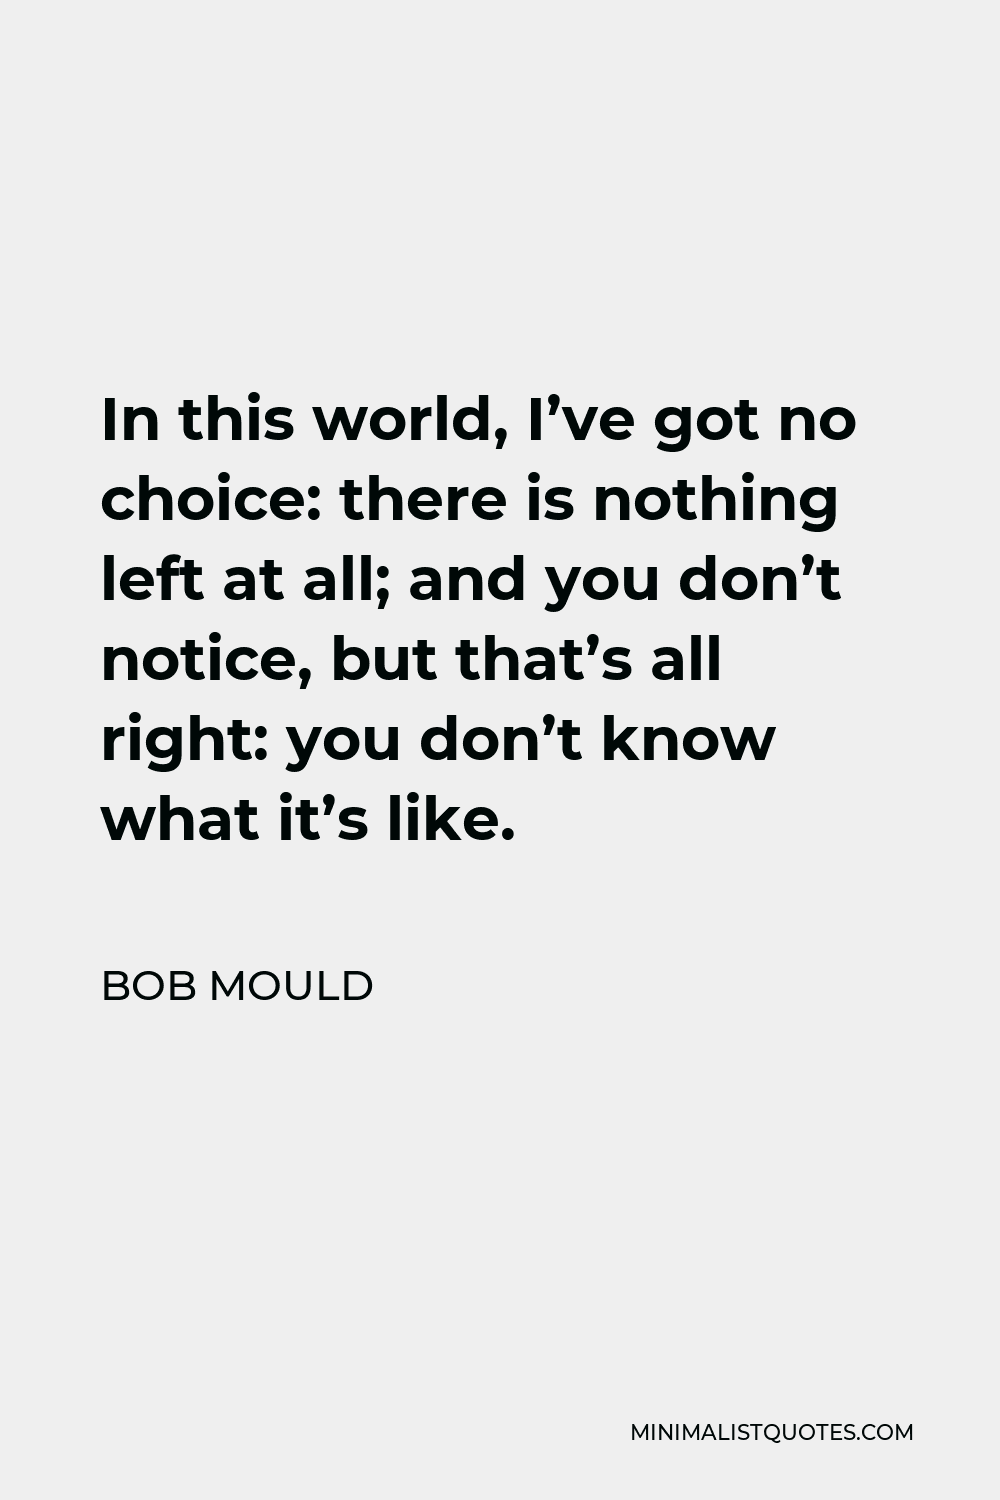 Bob Mould Quote - In this world, I’ve got no choice: there is nothing left at all; and you don’t notice, but that’s all right: you don’t know what it’s like.